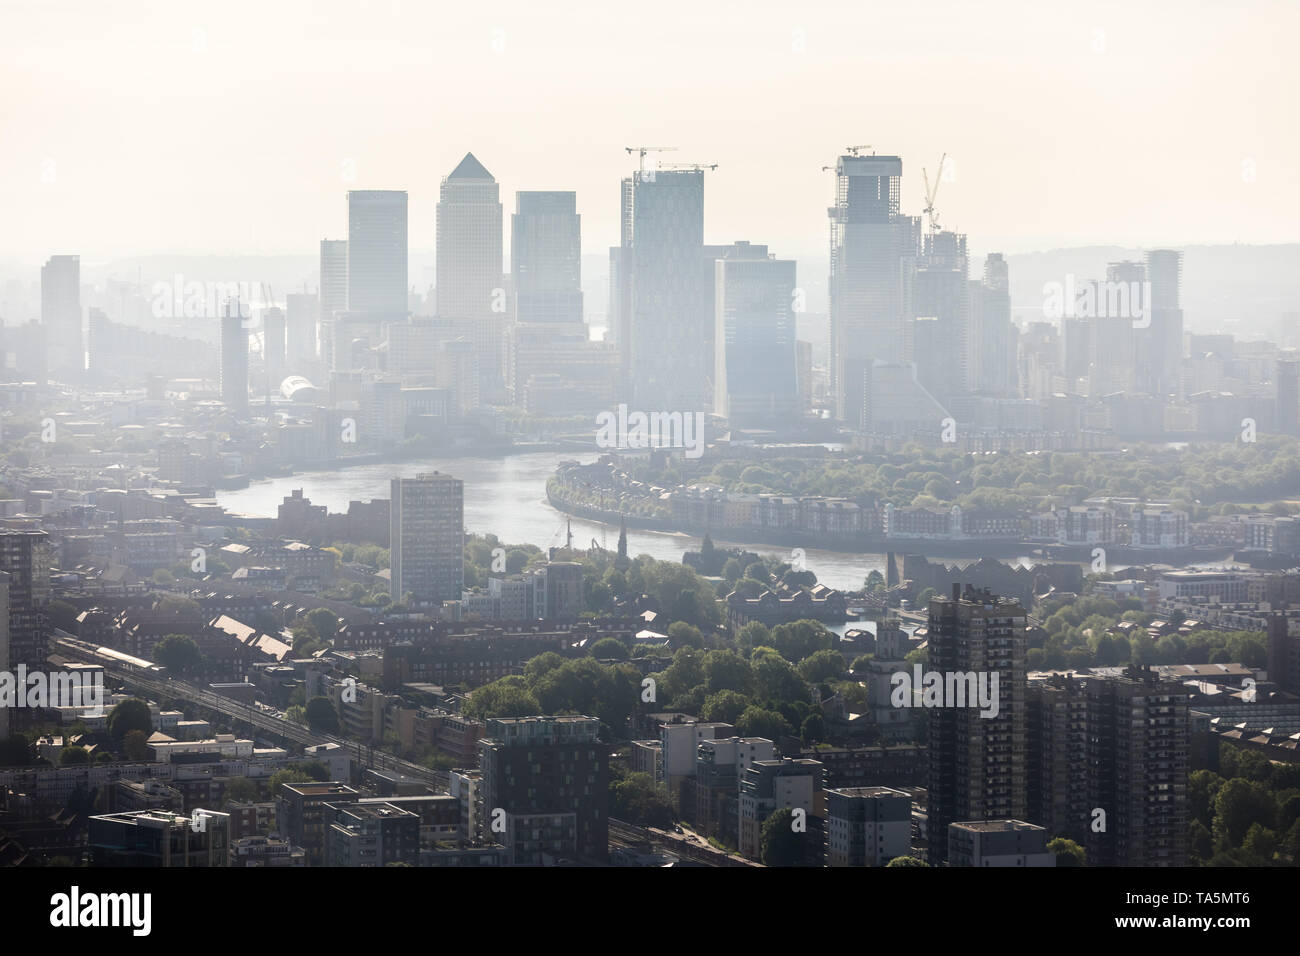 UK Weather: Morning city haze over Canary Wharf business park buildings in east London. Local air particulate pollutant emissions currently 'moderate' Stock Photo